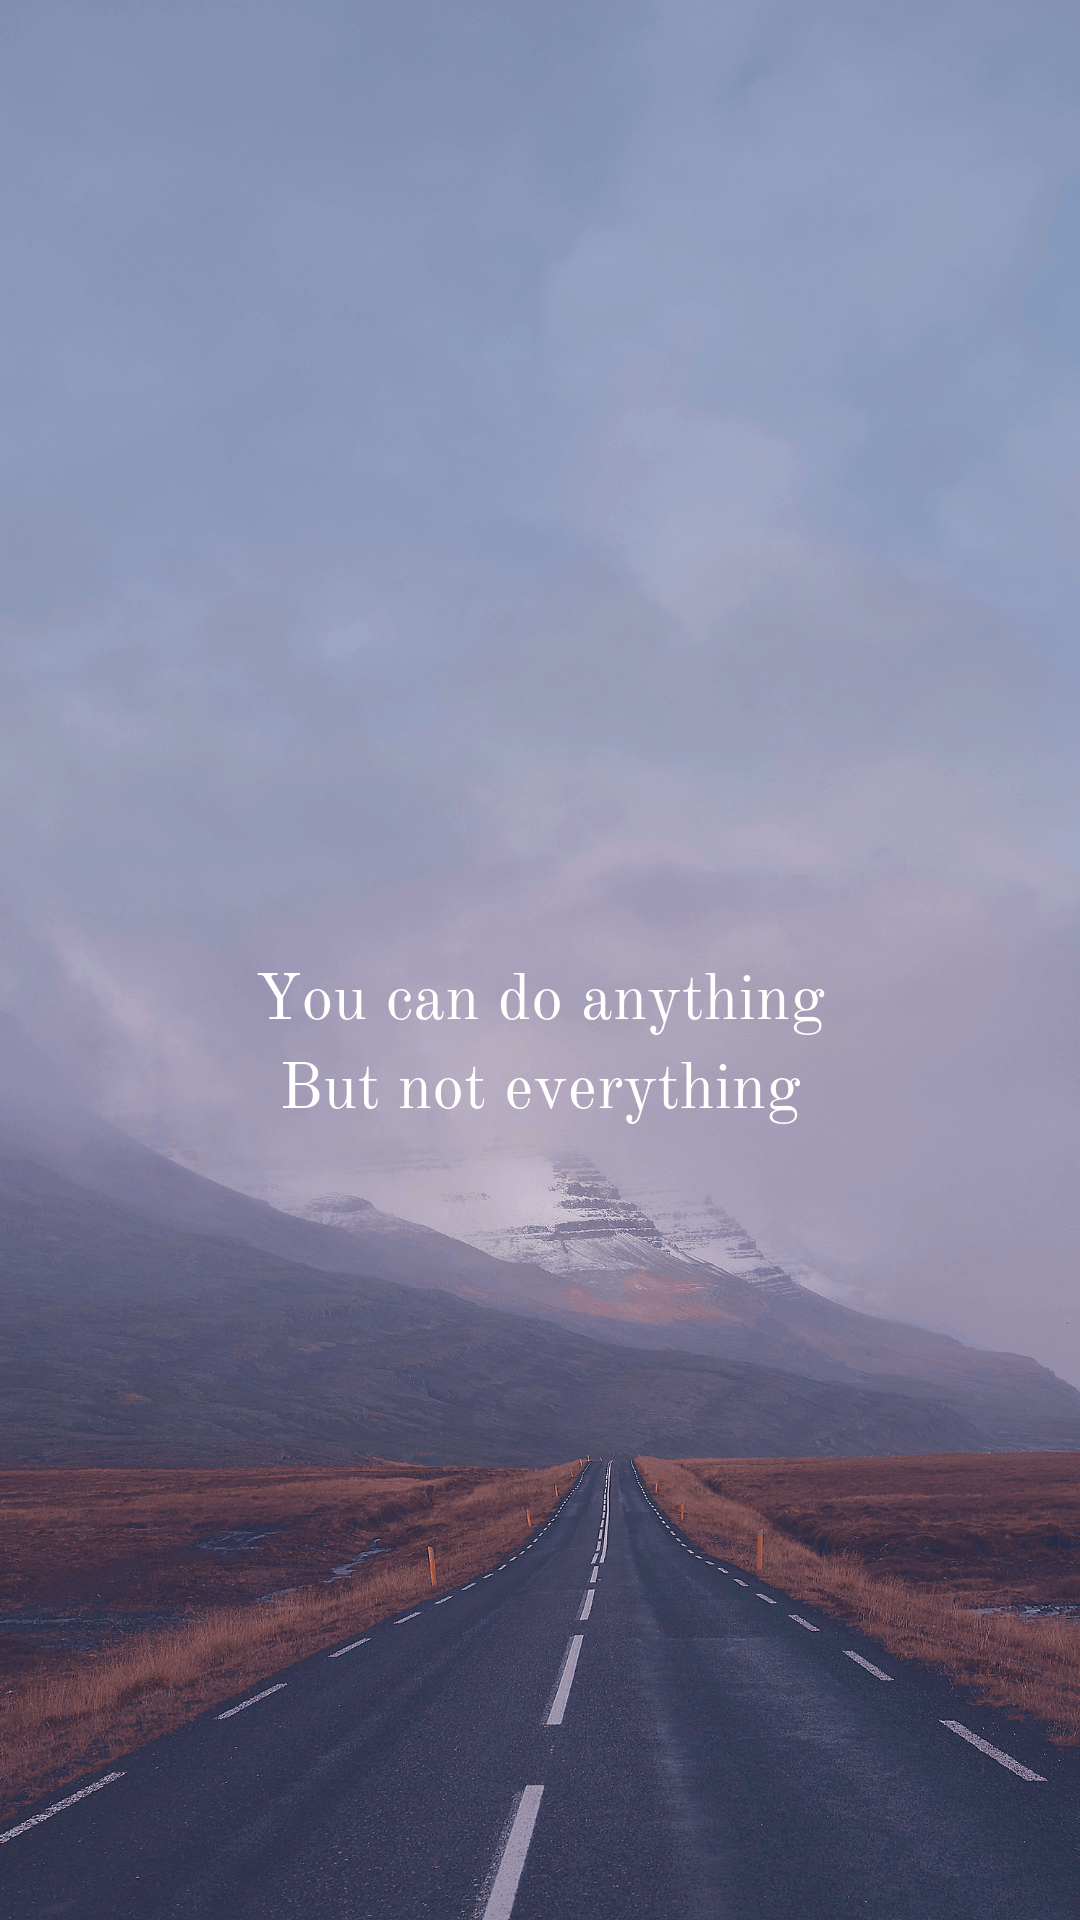 phone wallpaper phone backgrounds quotes free phone wallpapers